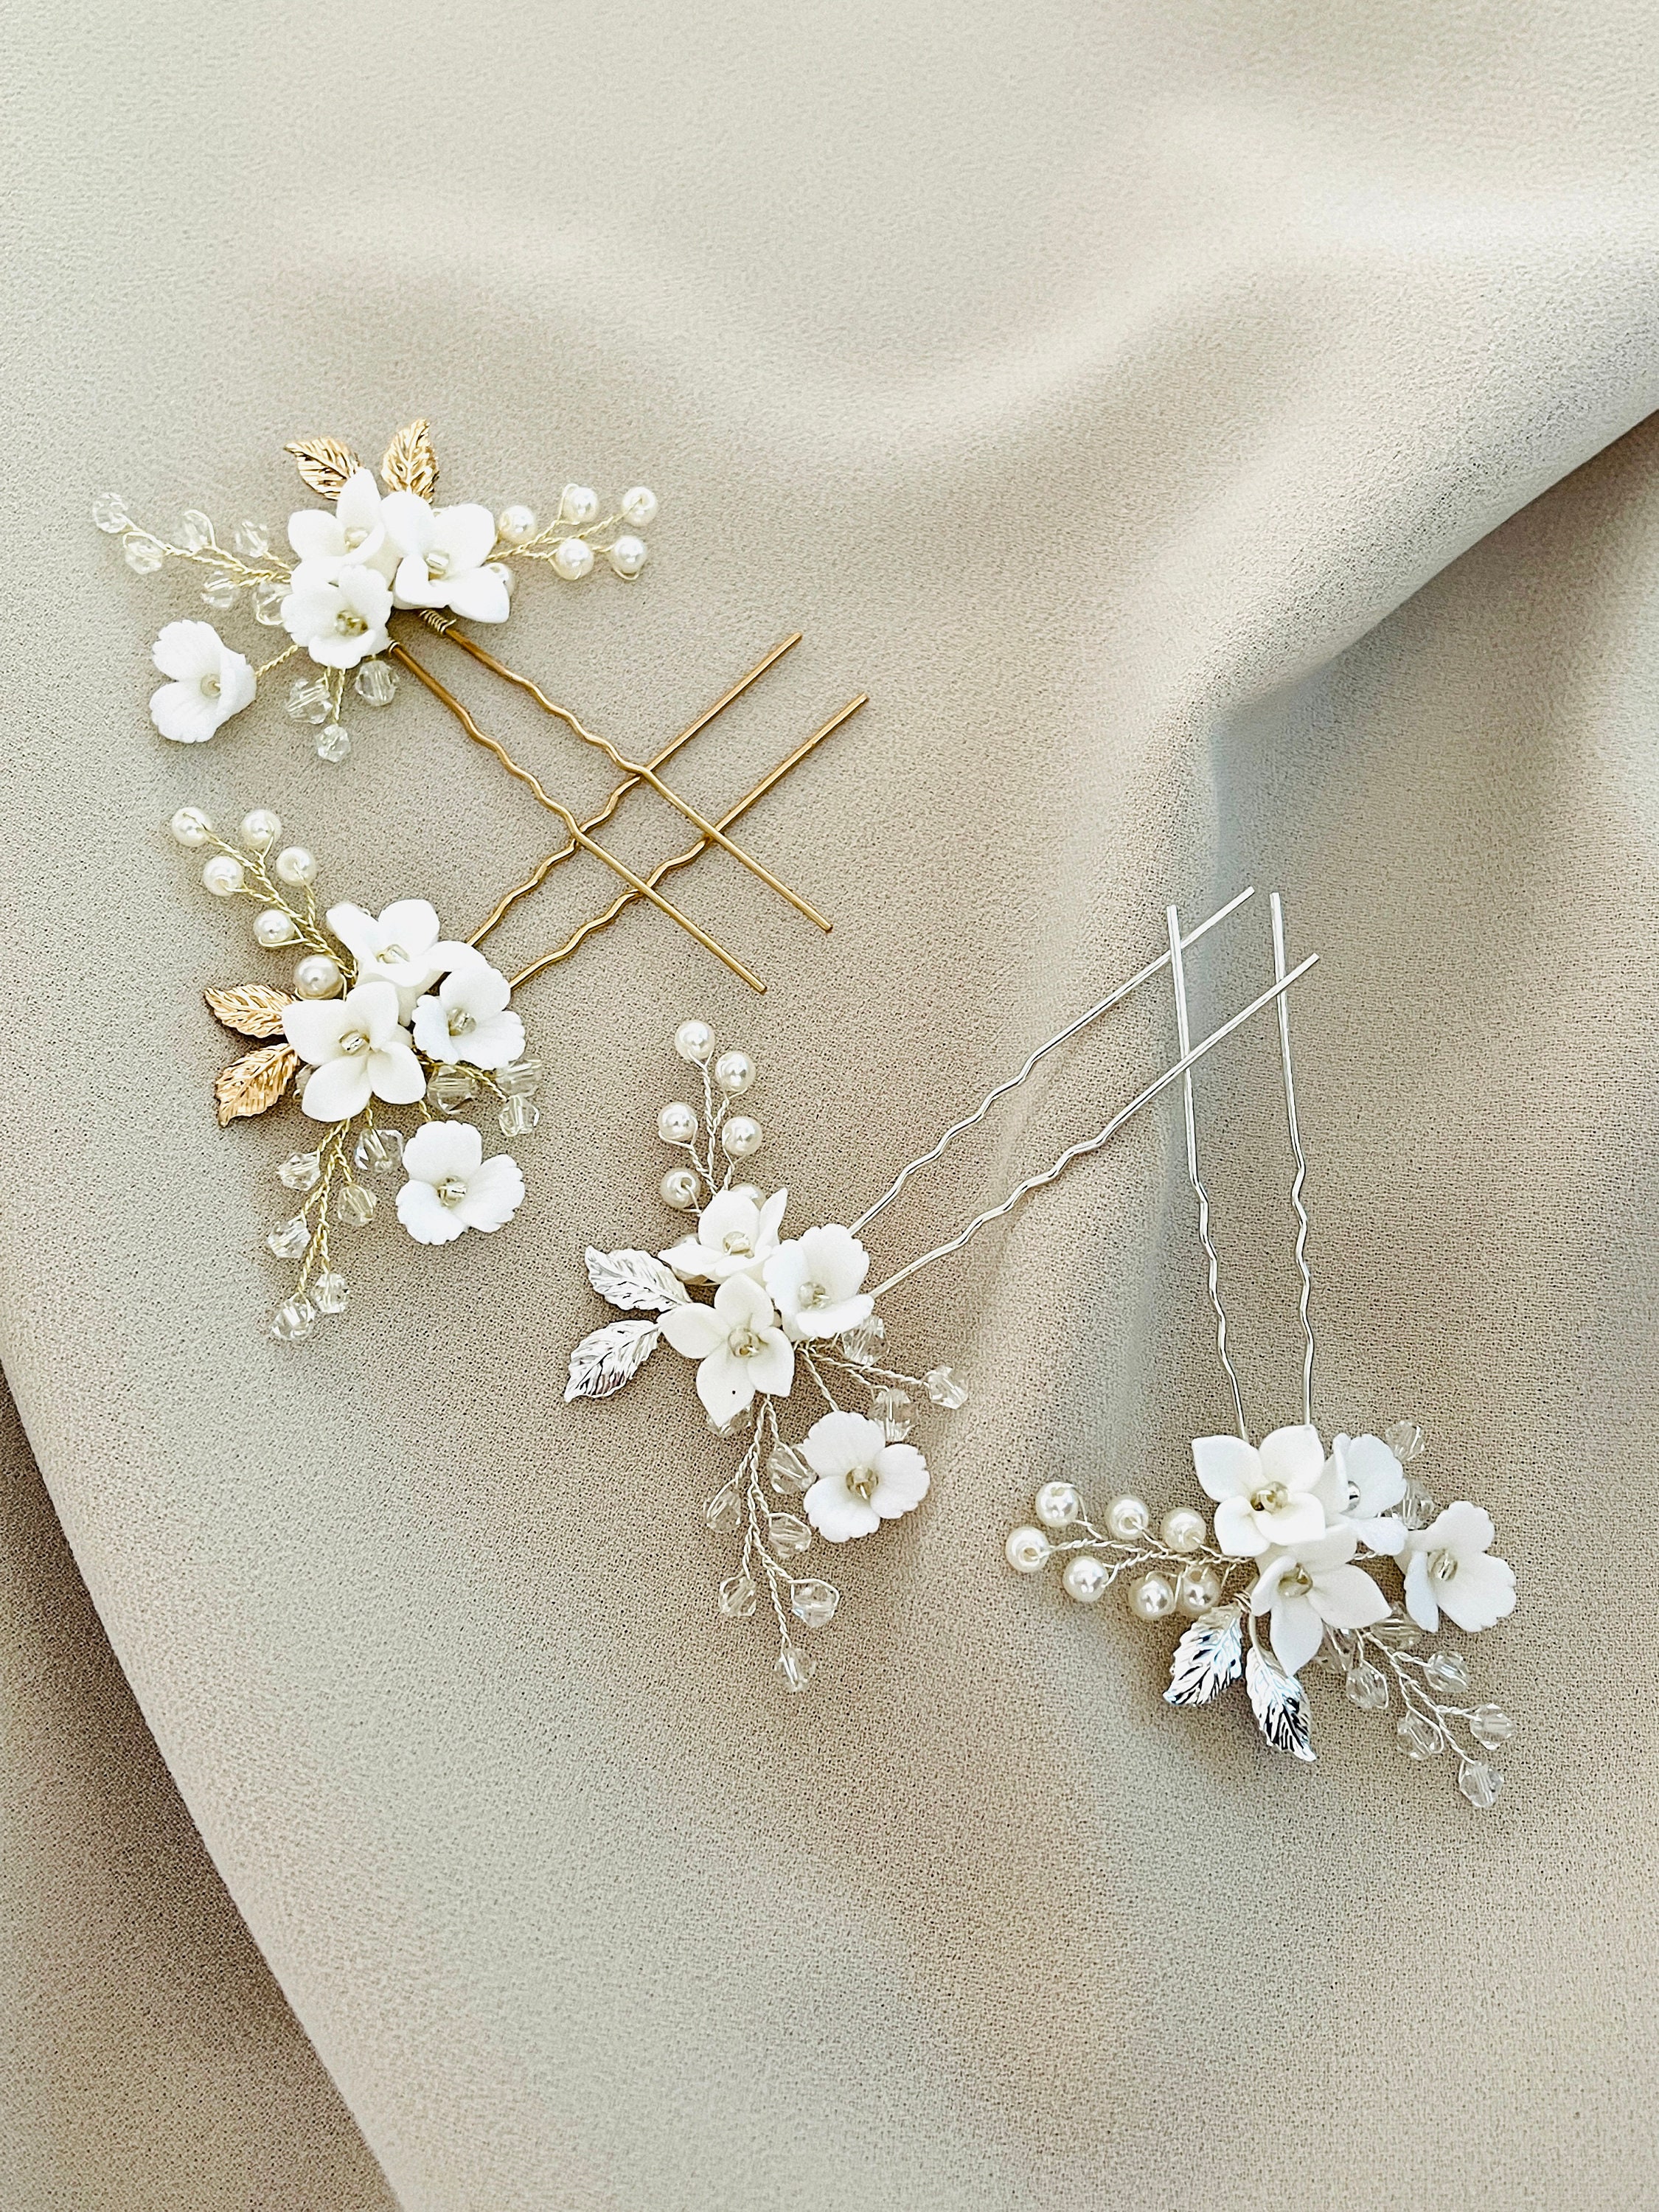 Faux Pearl Clear Glass Crystal White Rose Blue Flower Hair Jewels Crystal Rhinestone 7-Piece Hairpin Set Victorian Rose Decorative Bobby Pins Boho Hair Accessories GEMSICLES GIFTS AH1014 